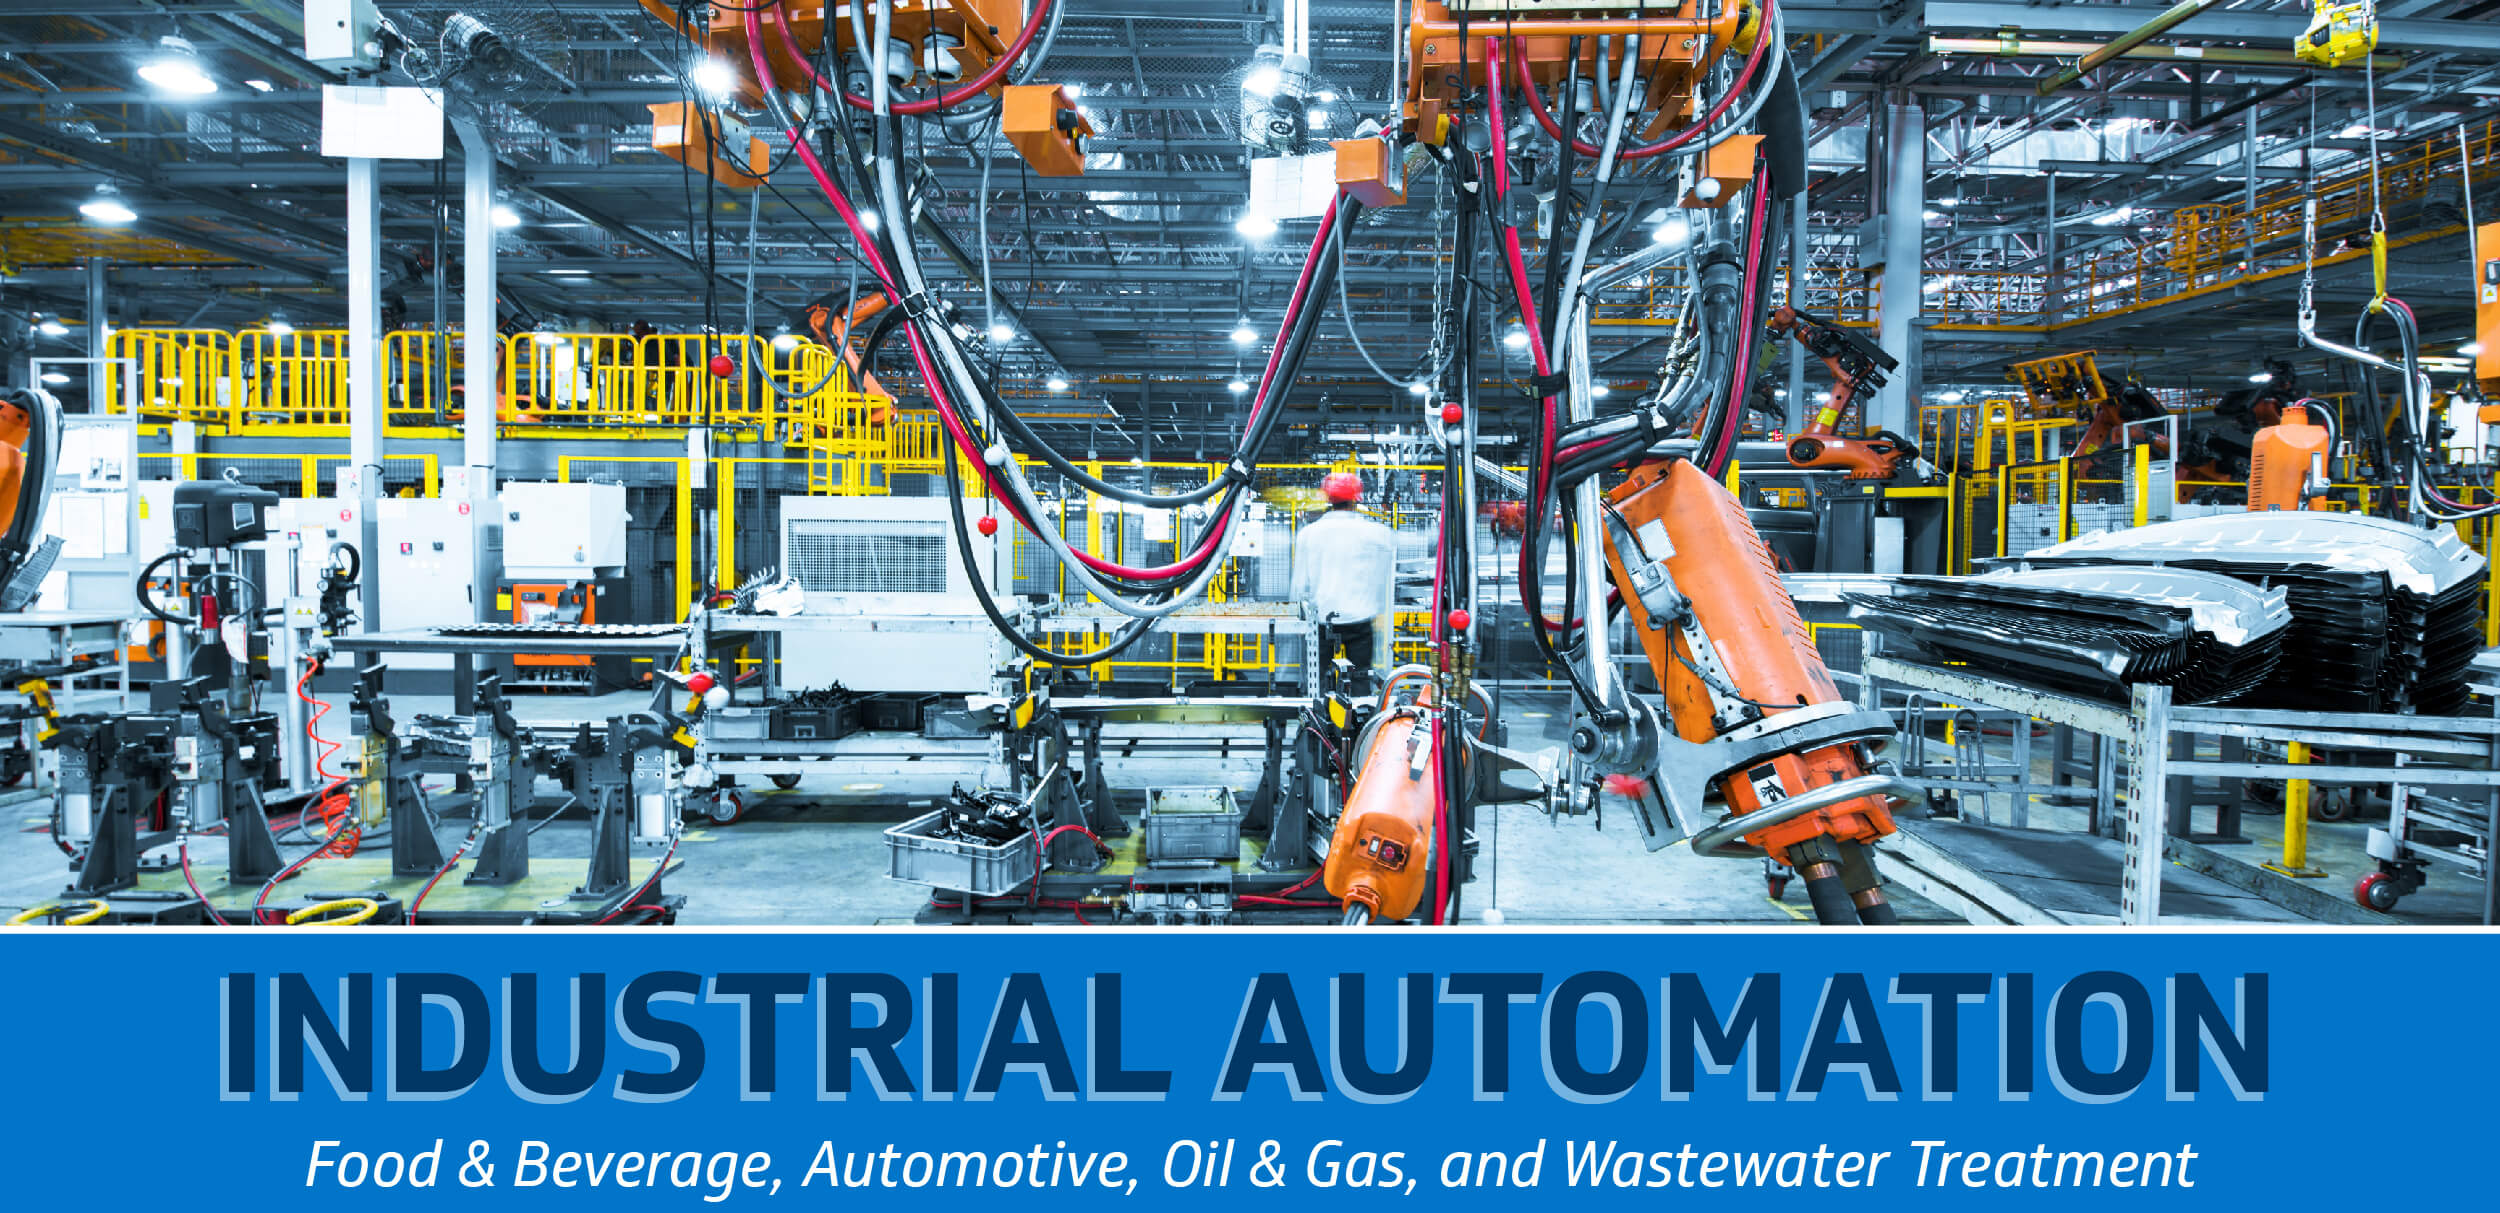 Industrial Automation - Food & Beverage, Automotive, Oil & Gas, and Wastewater Treatment